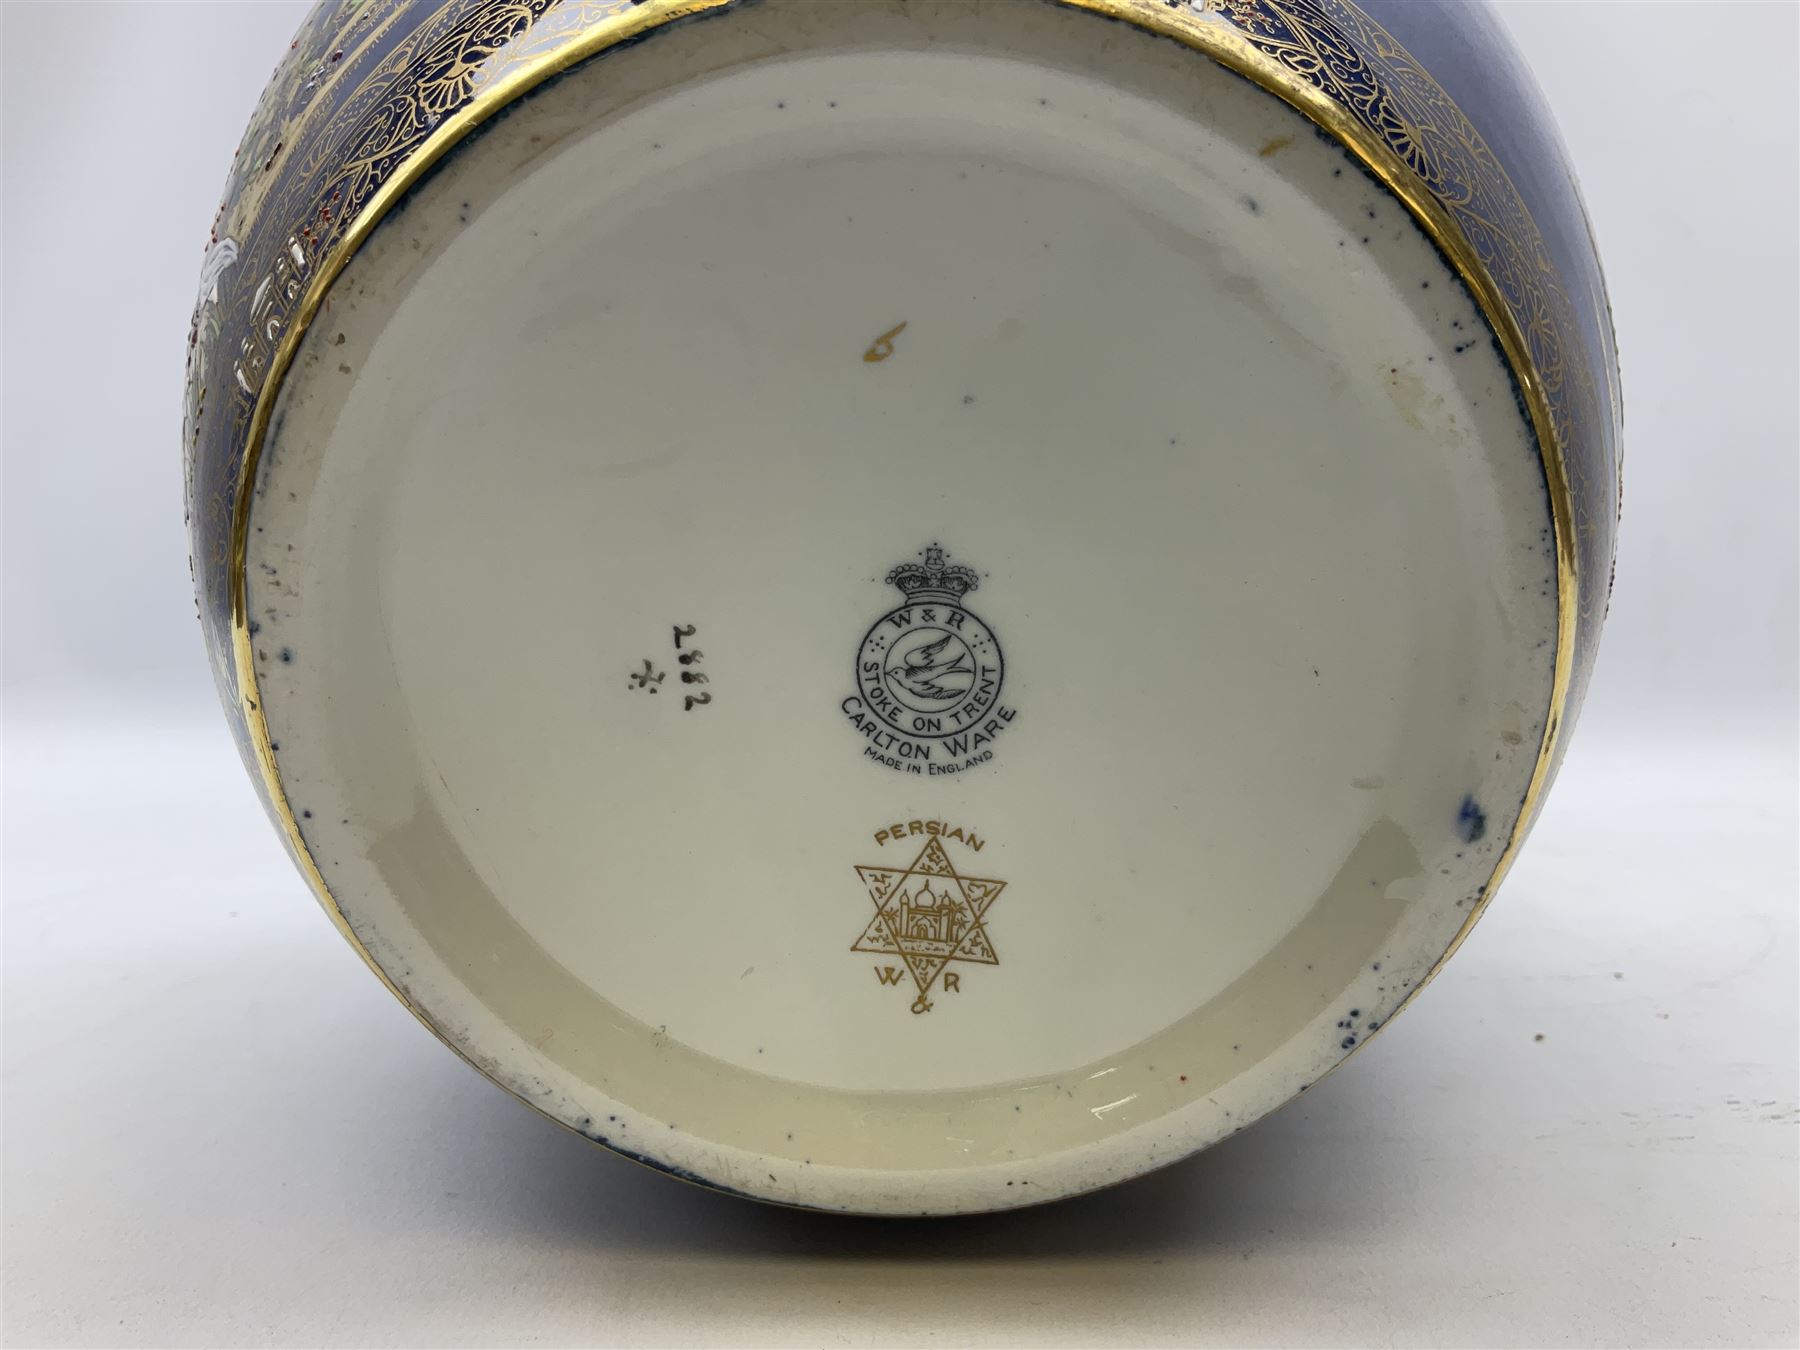 Carlton Ware Persian pattern ginger jar and cover decorated with an enamel and gilt Chinoiserie land - Image 6 of 7